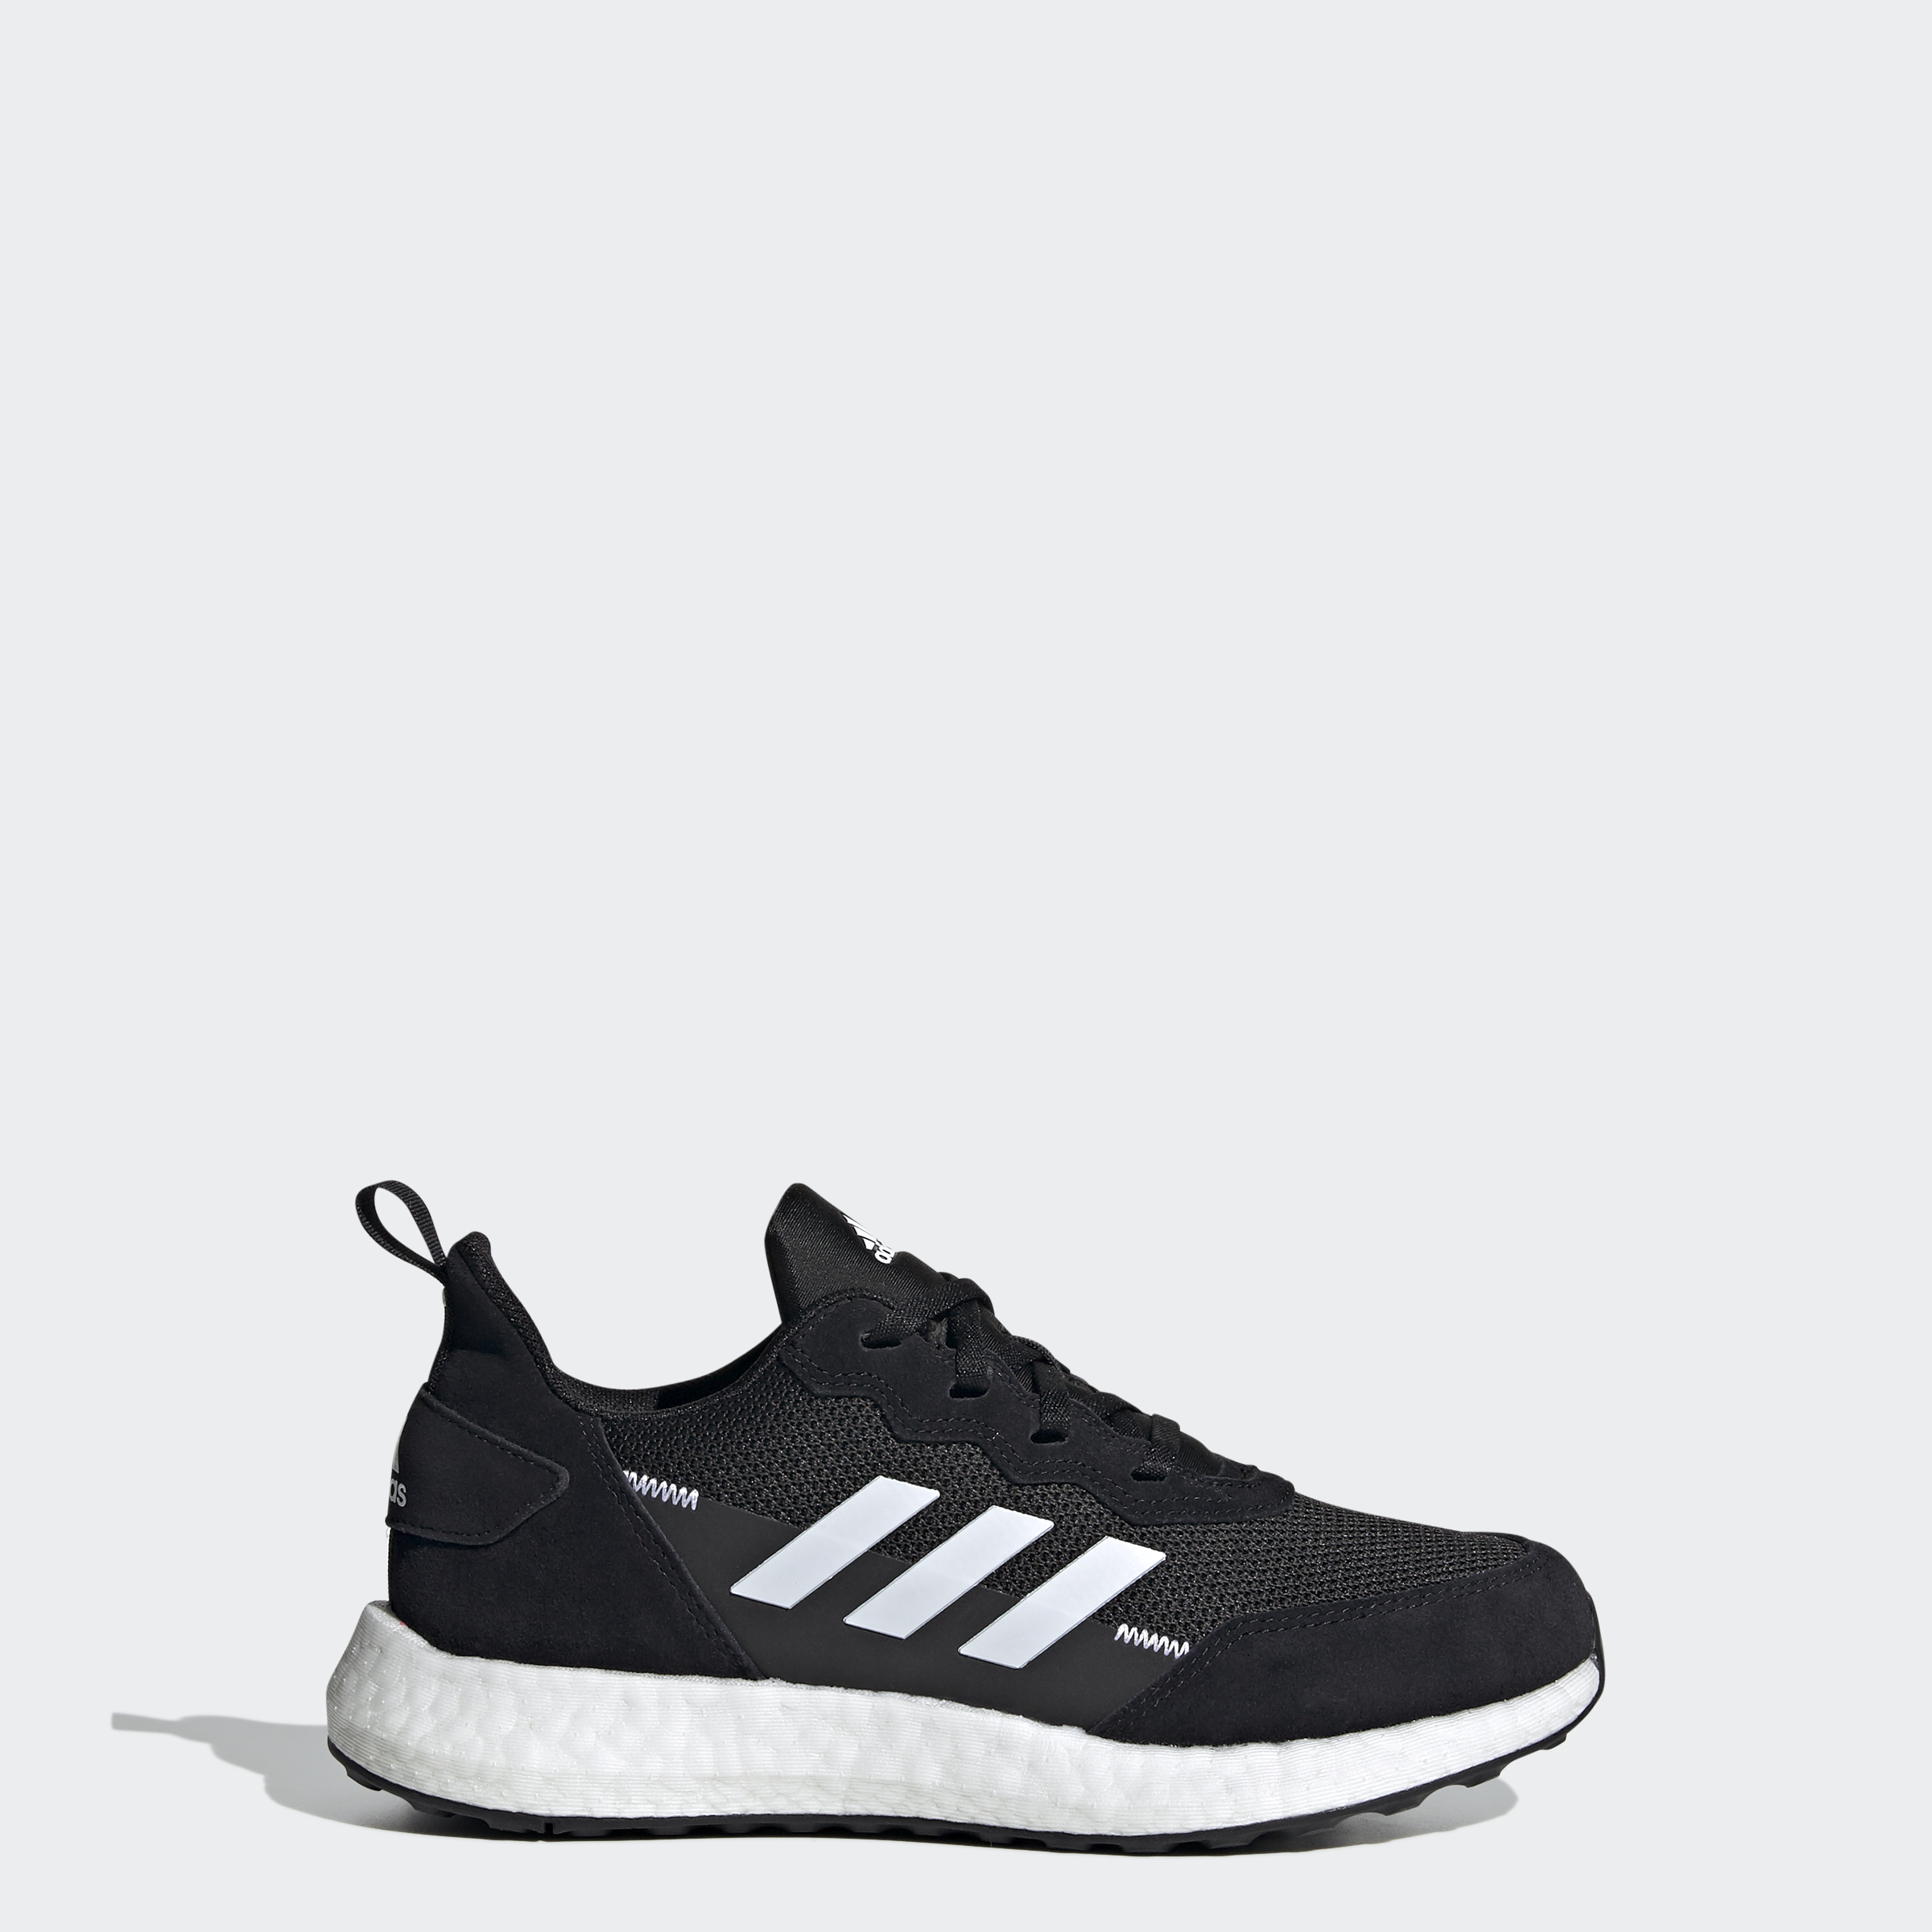 adidas RapidaLux S and L Shoes Kids' | eBay